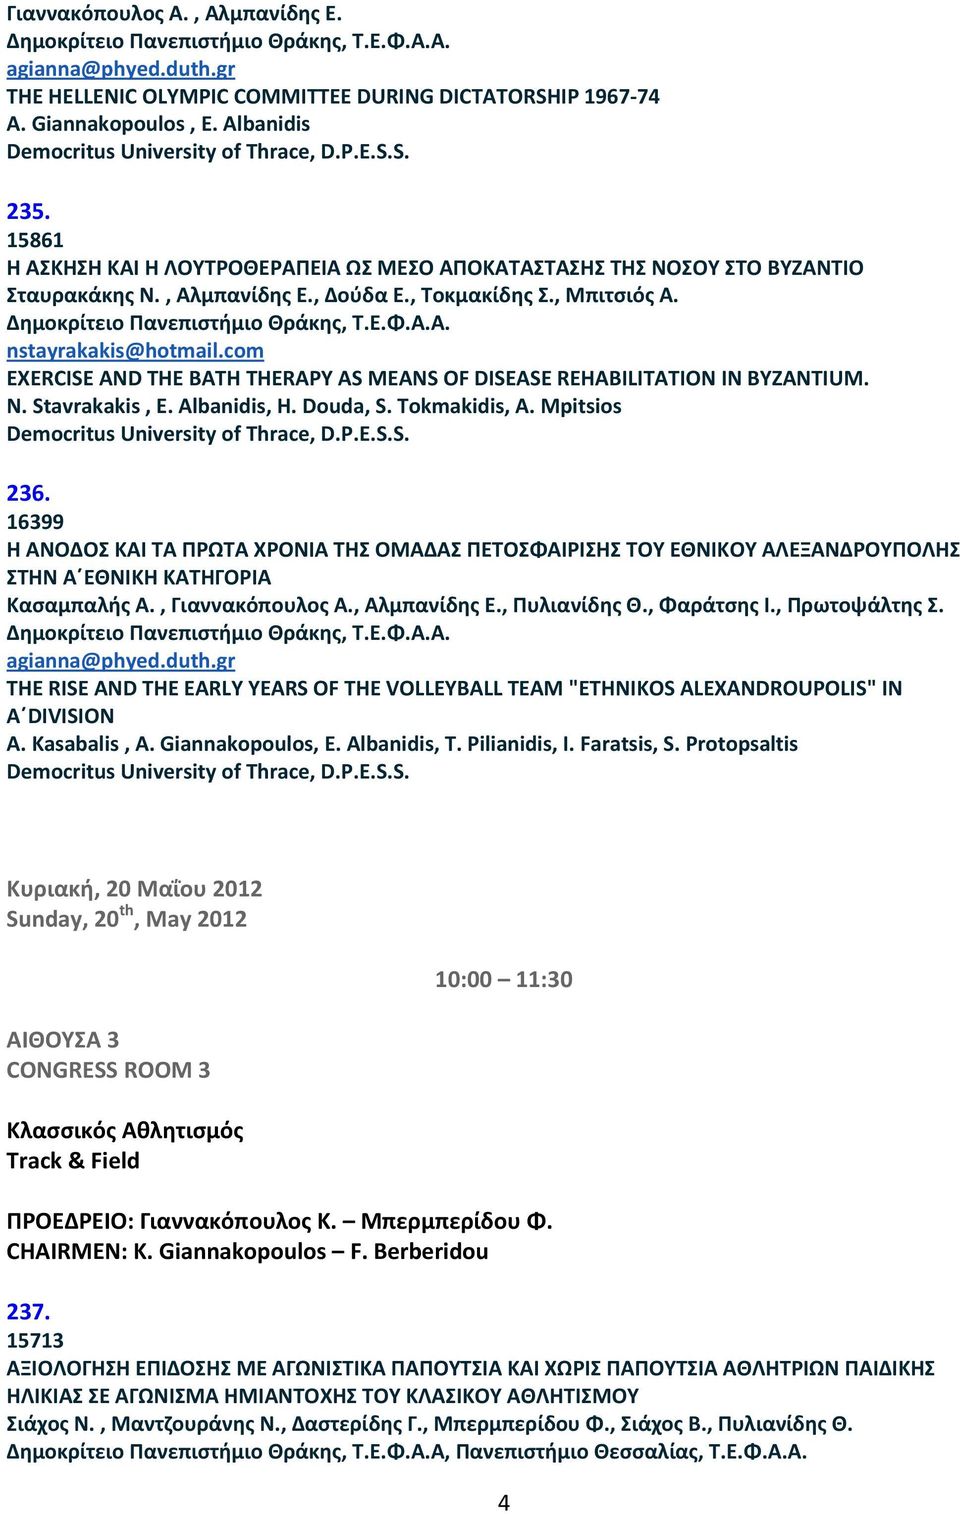 com EXERCISE AND THE BATH THERAPY AS MEANS OF DISEASE REHABILITATION IN BYZANTIUM. N. Stavrakakis, E. Albanidis, H. Douda, S. Tokmakidis, A. Mpitsios 236.